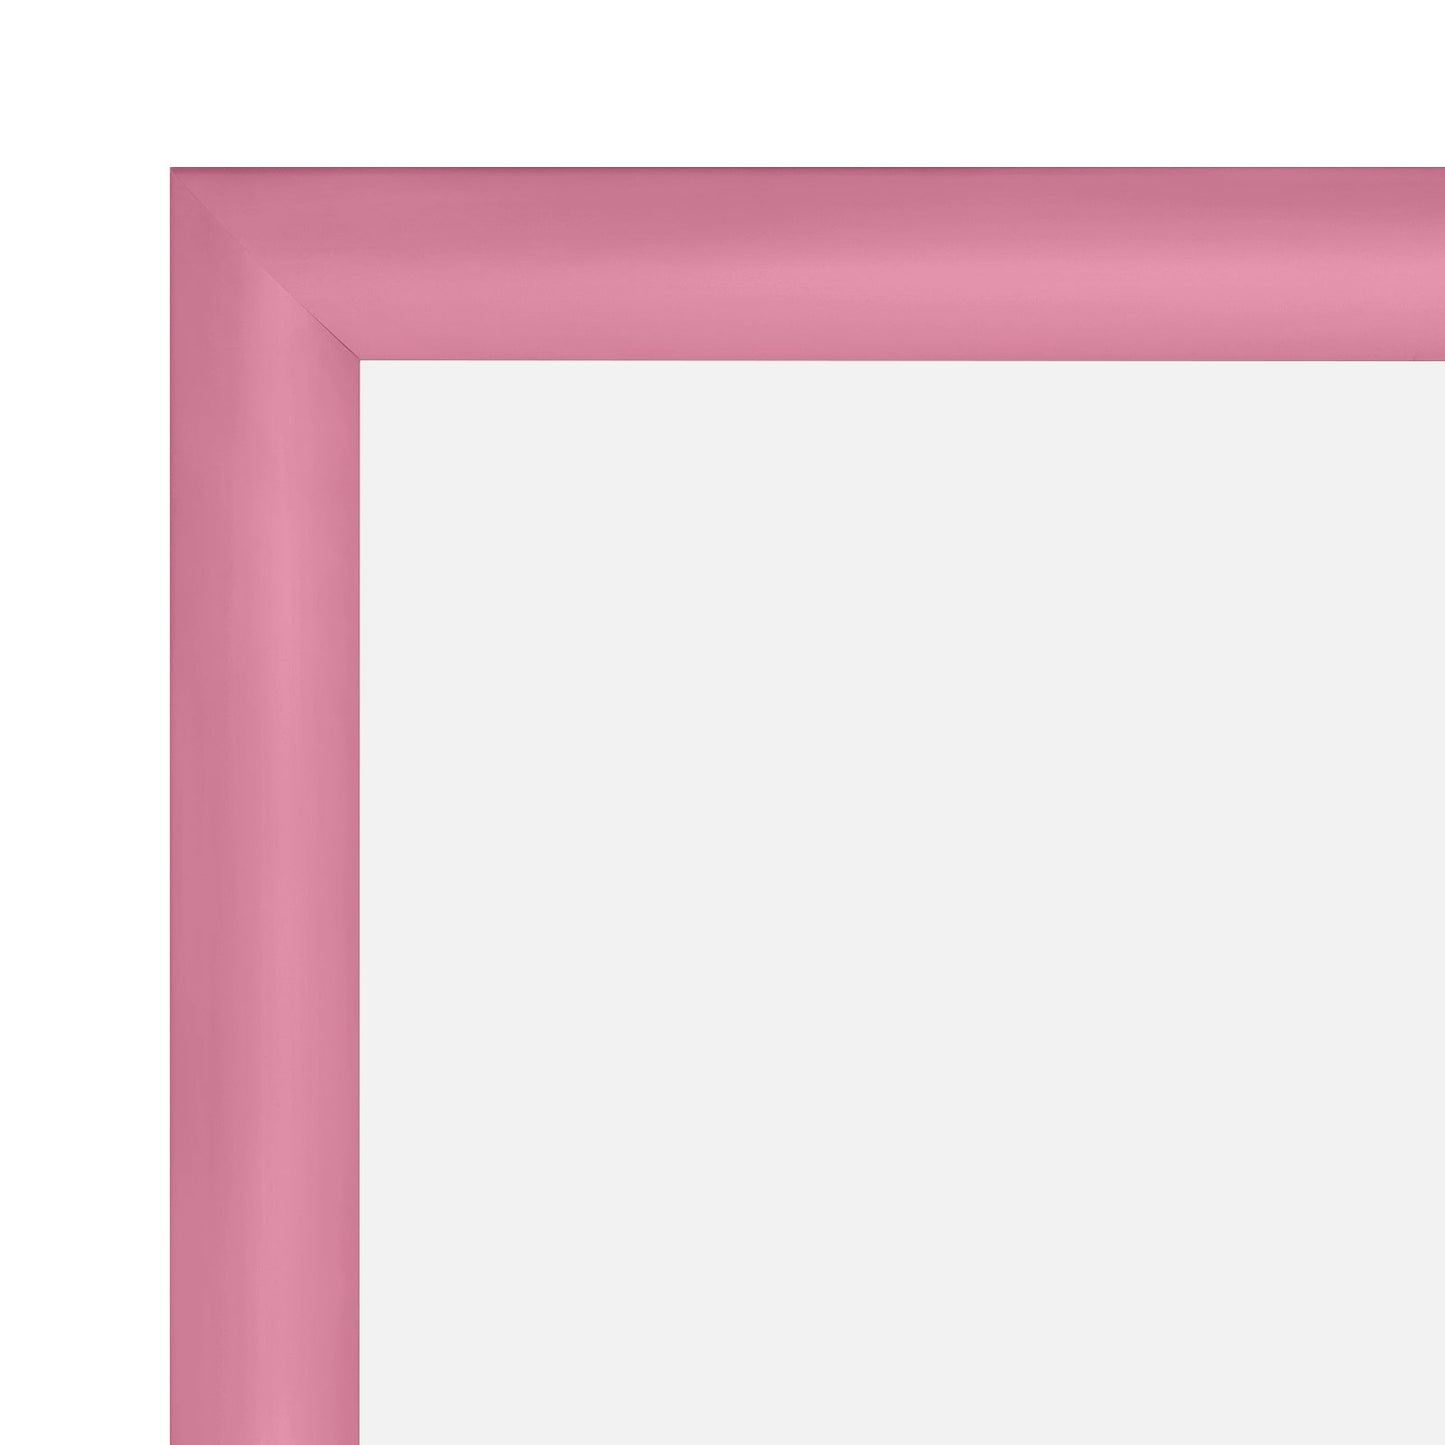 27x40 Pink SnapeZo® Snap Frame - 1.2" Profile - Snap Frames Direct